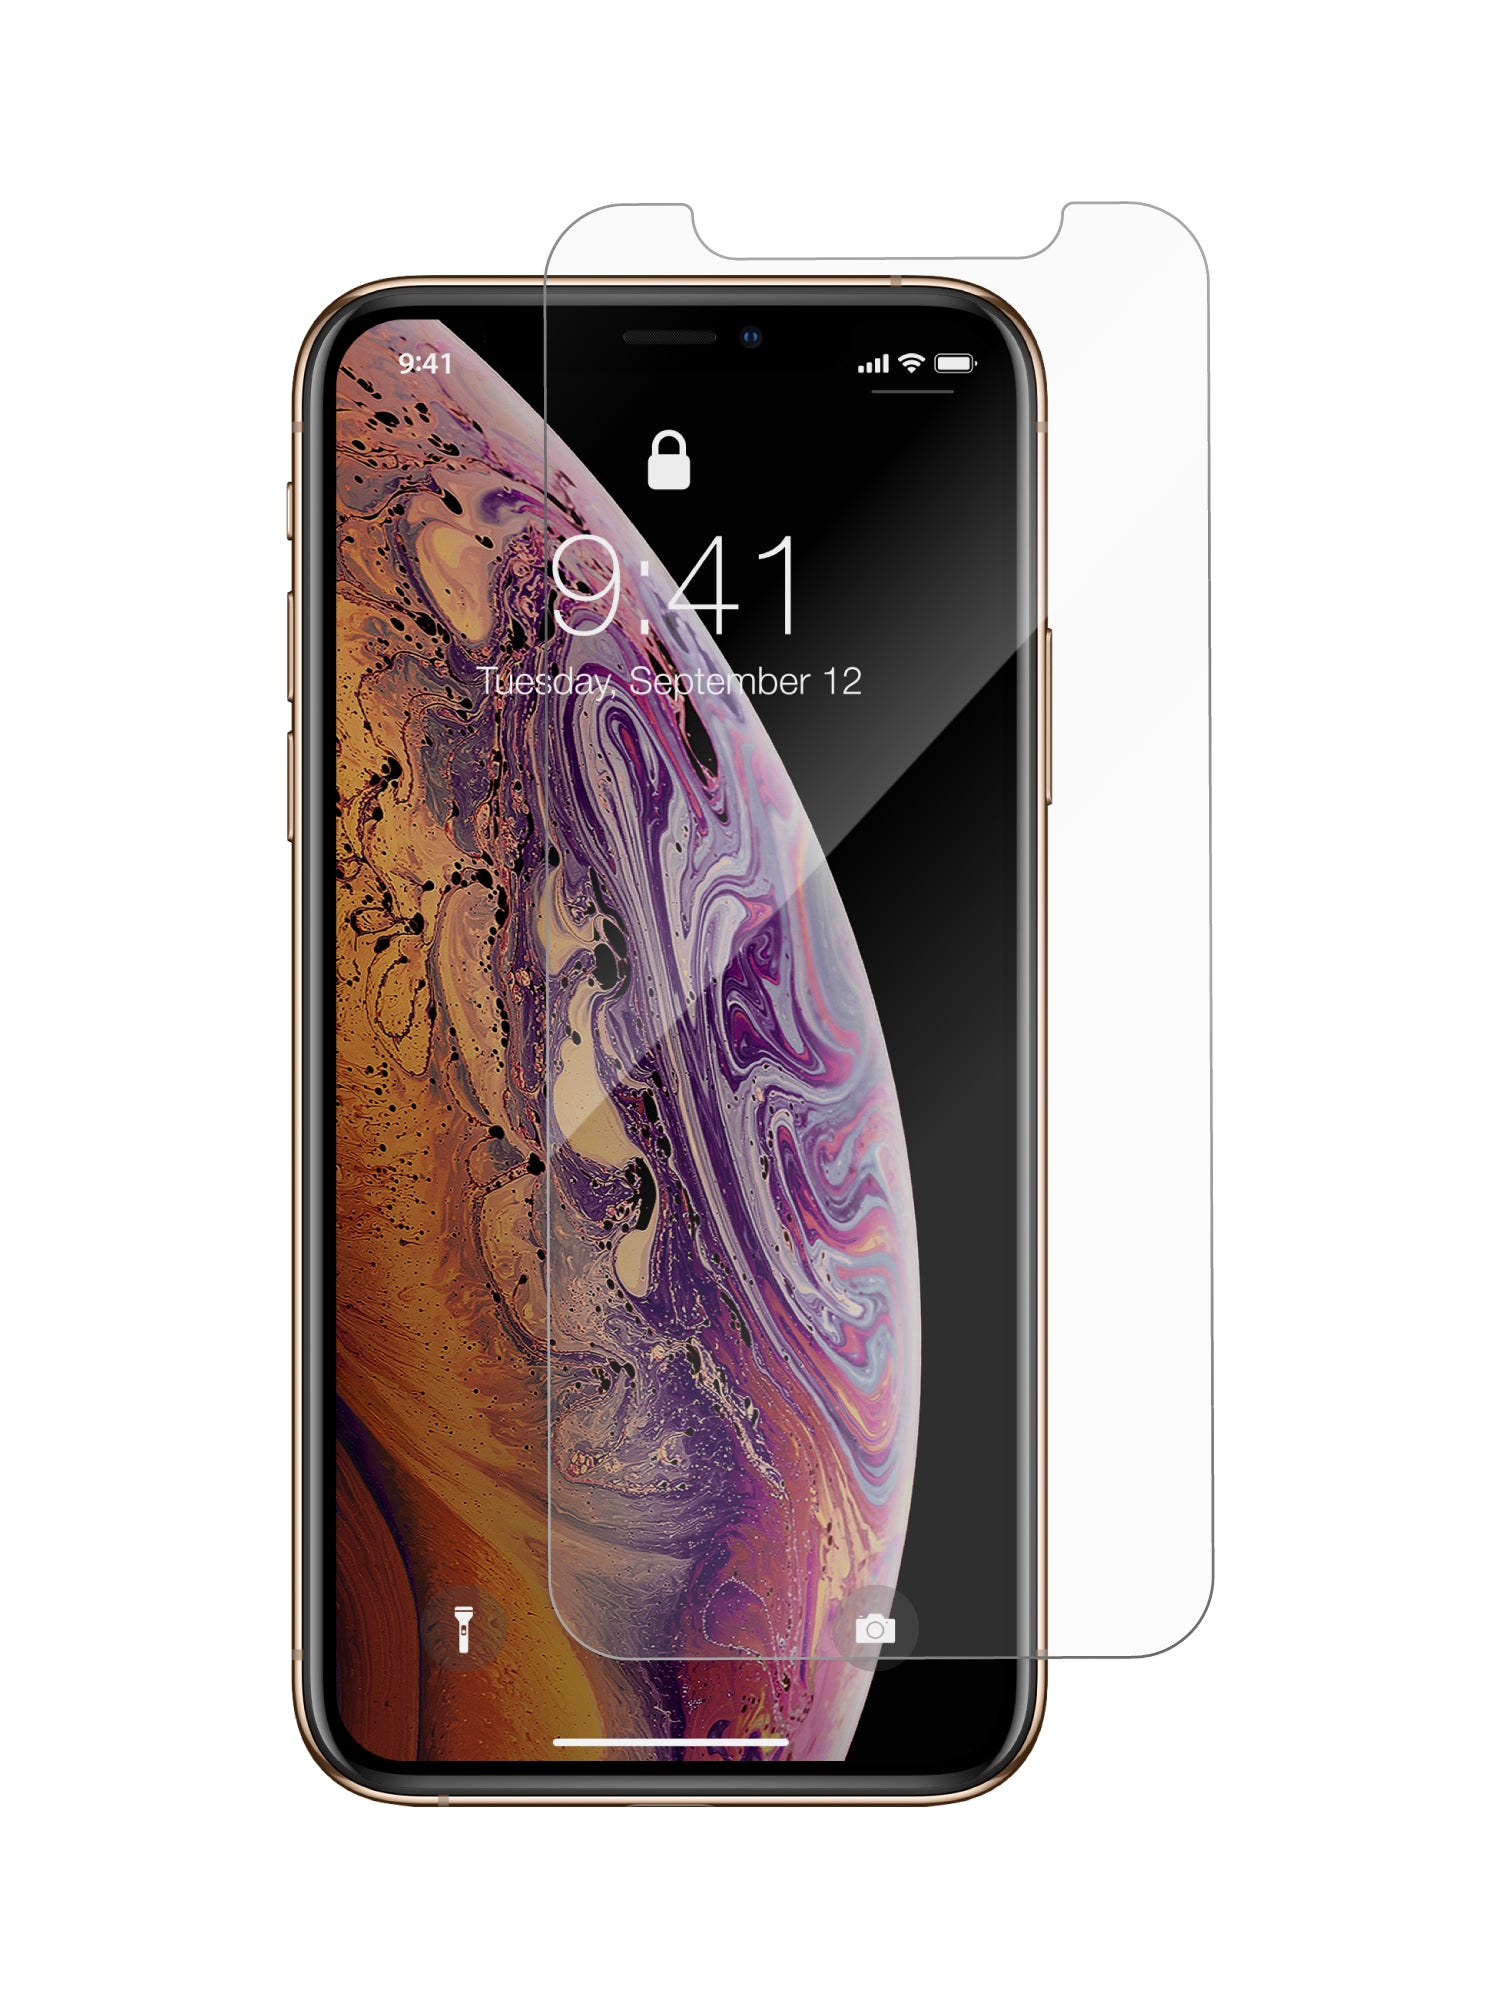 Armor Edge - Protective Glass for iPhone XS